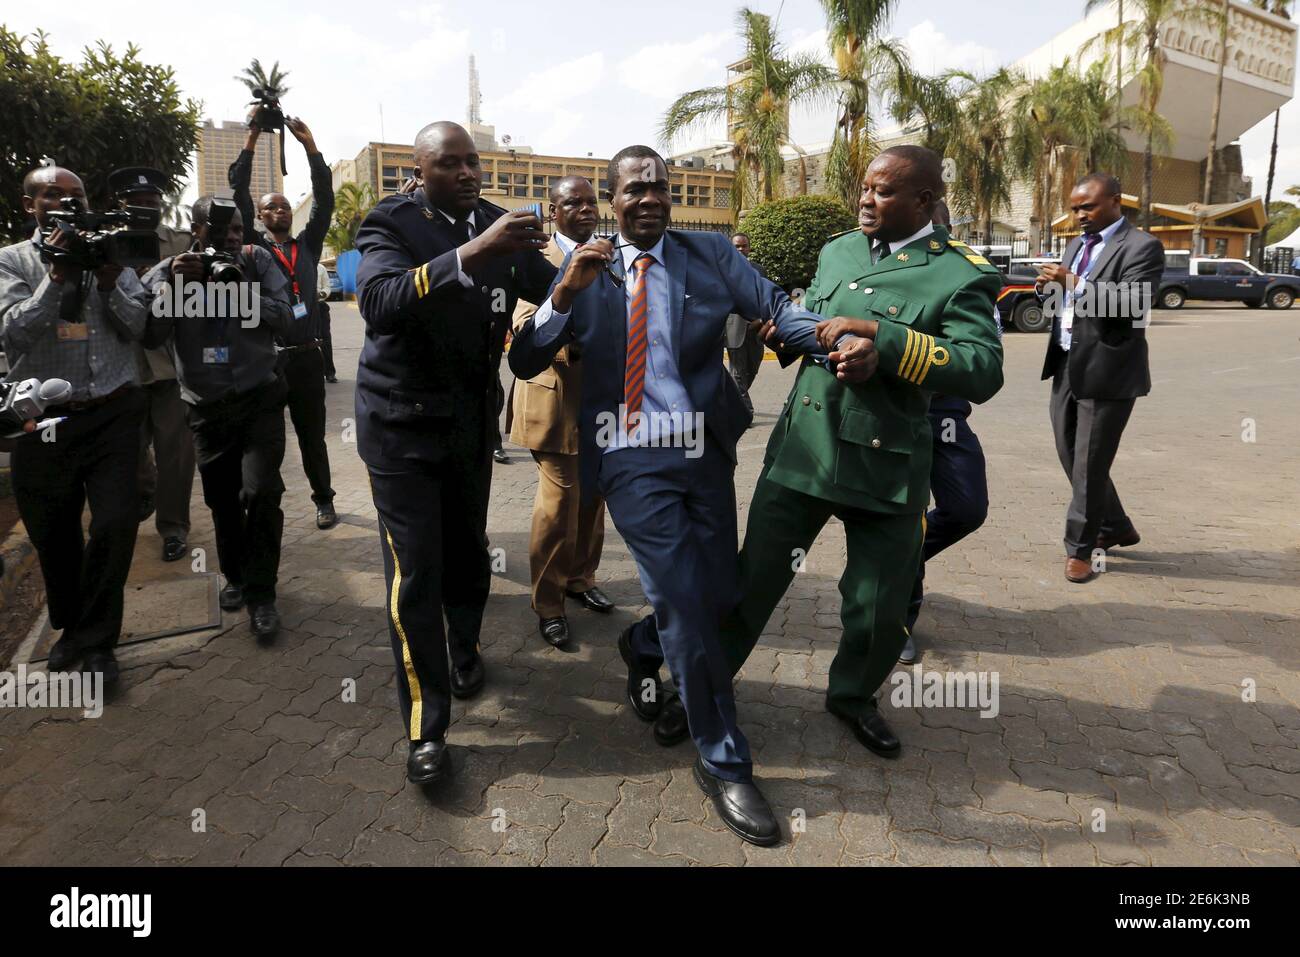 Kenyan Member of Parliament for Ugujna Constituency Opiyo Wandayi (C) is ejected from the National Assembly for blowing whistles during President Uhuru Kenyatta's annual State of the Nation address at the Parliament Buildings in the capital Nairobi, March 31, 2016. REUTERS/Thomas Mukoya? Stock Photo